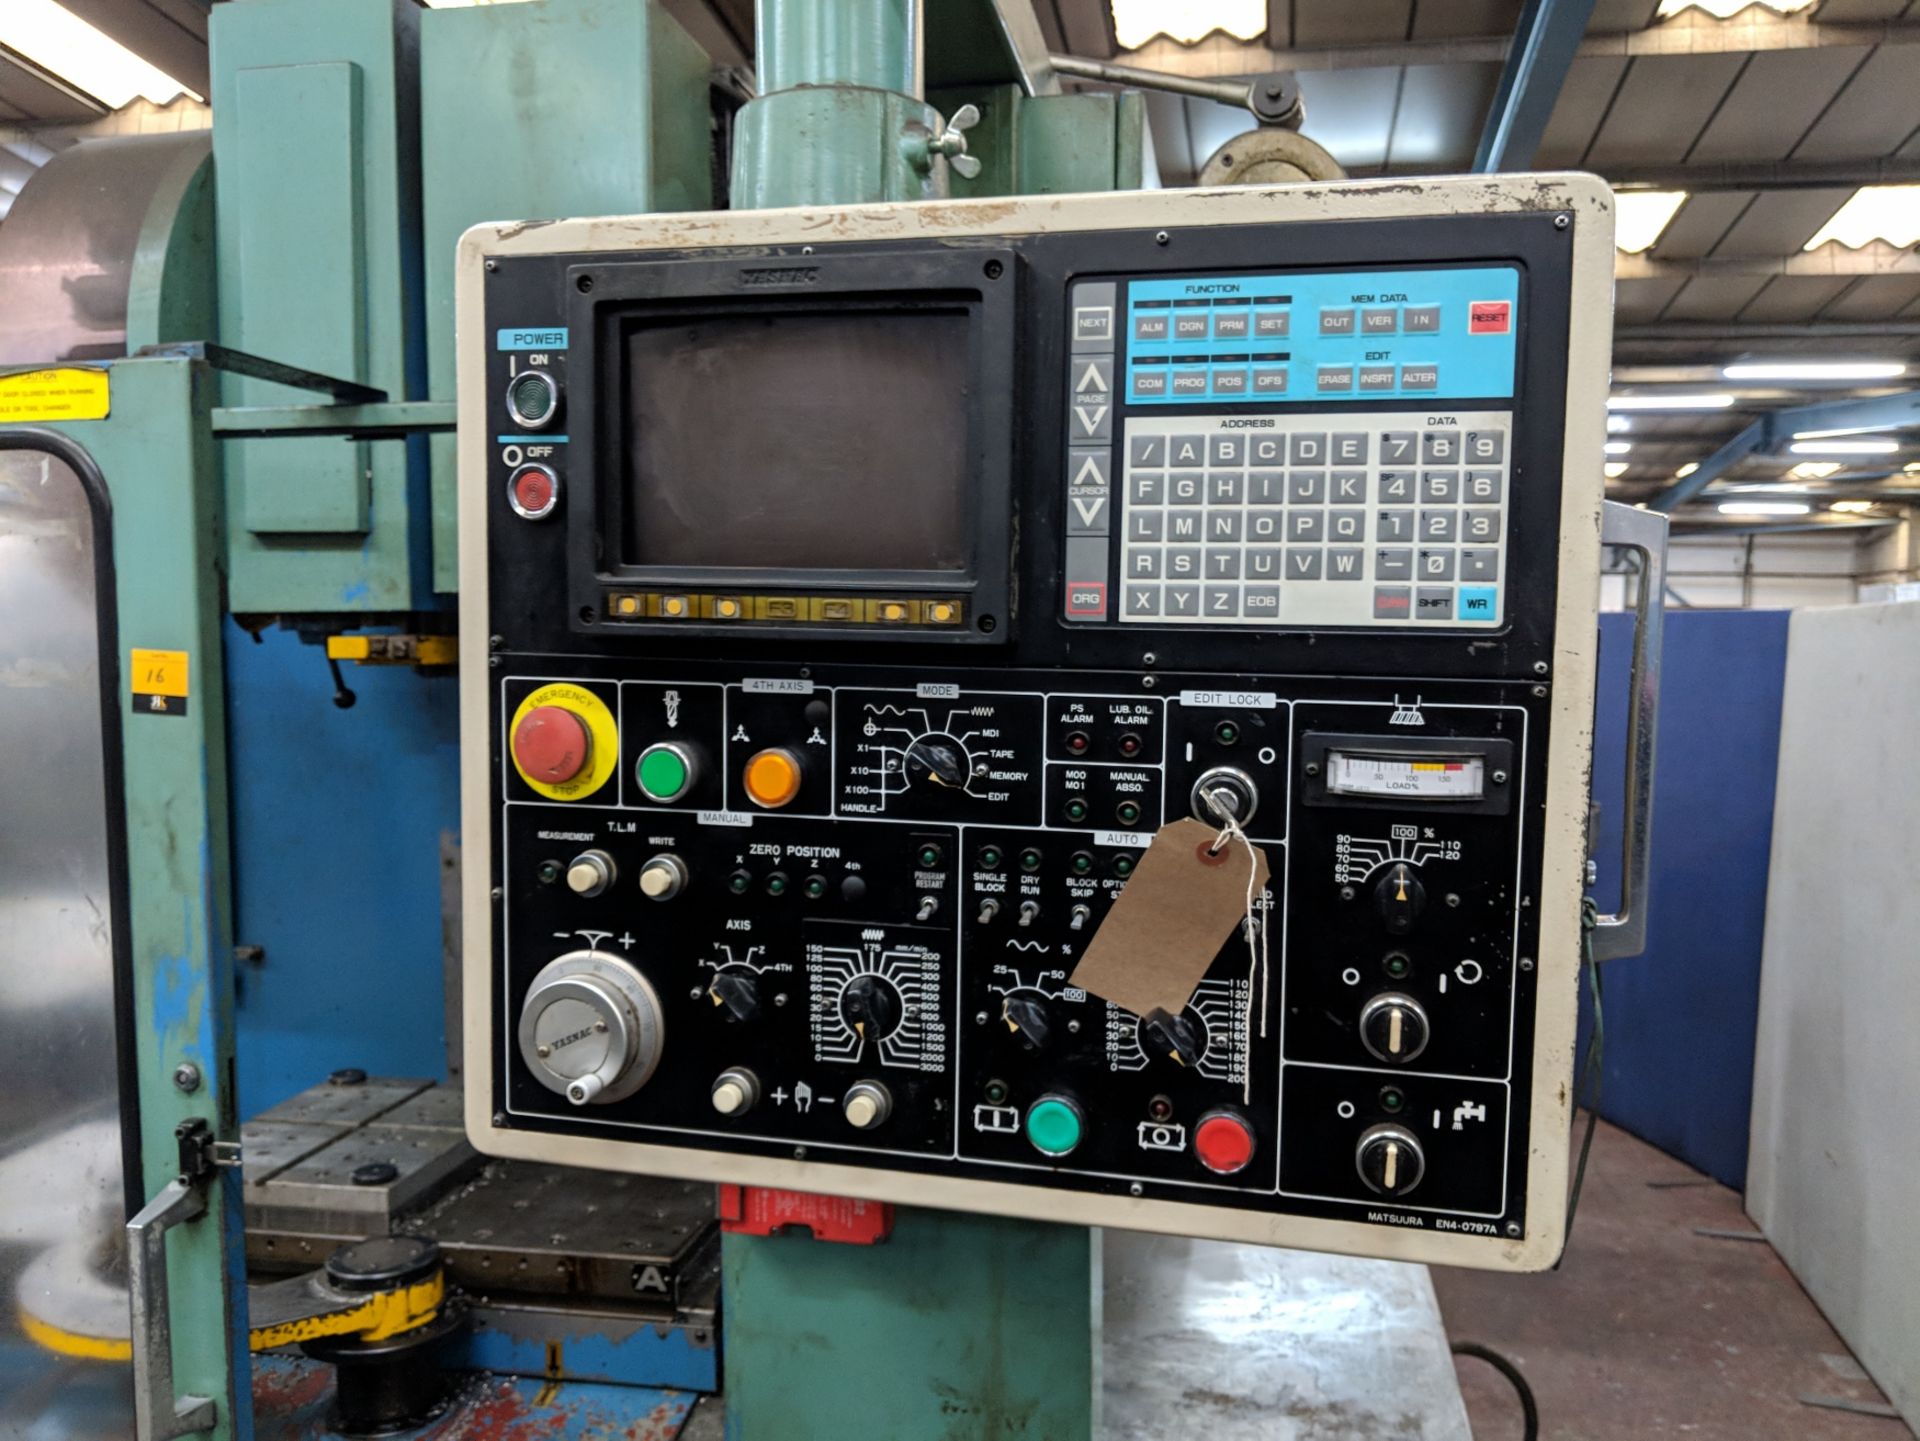 Matsuura-1 machining centre, year of manufacture 1990, serial no. 900408283 complete with Yasnac - Image 5 of 5